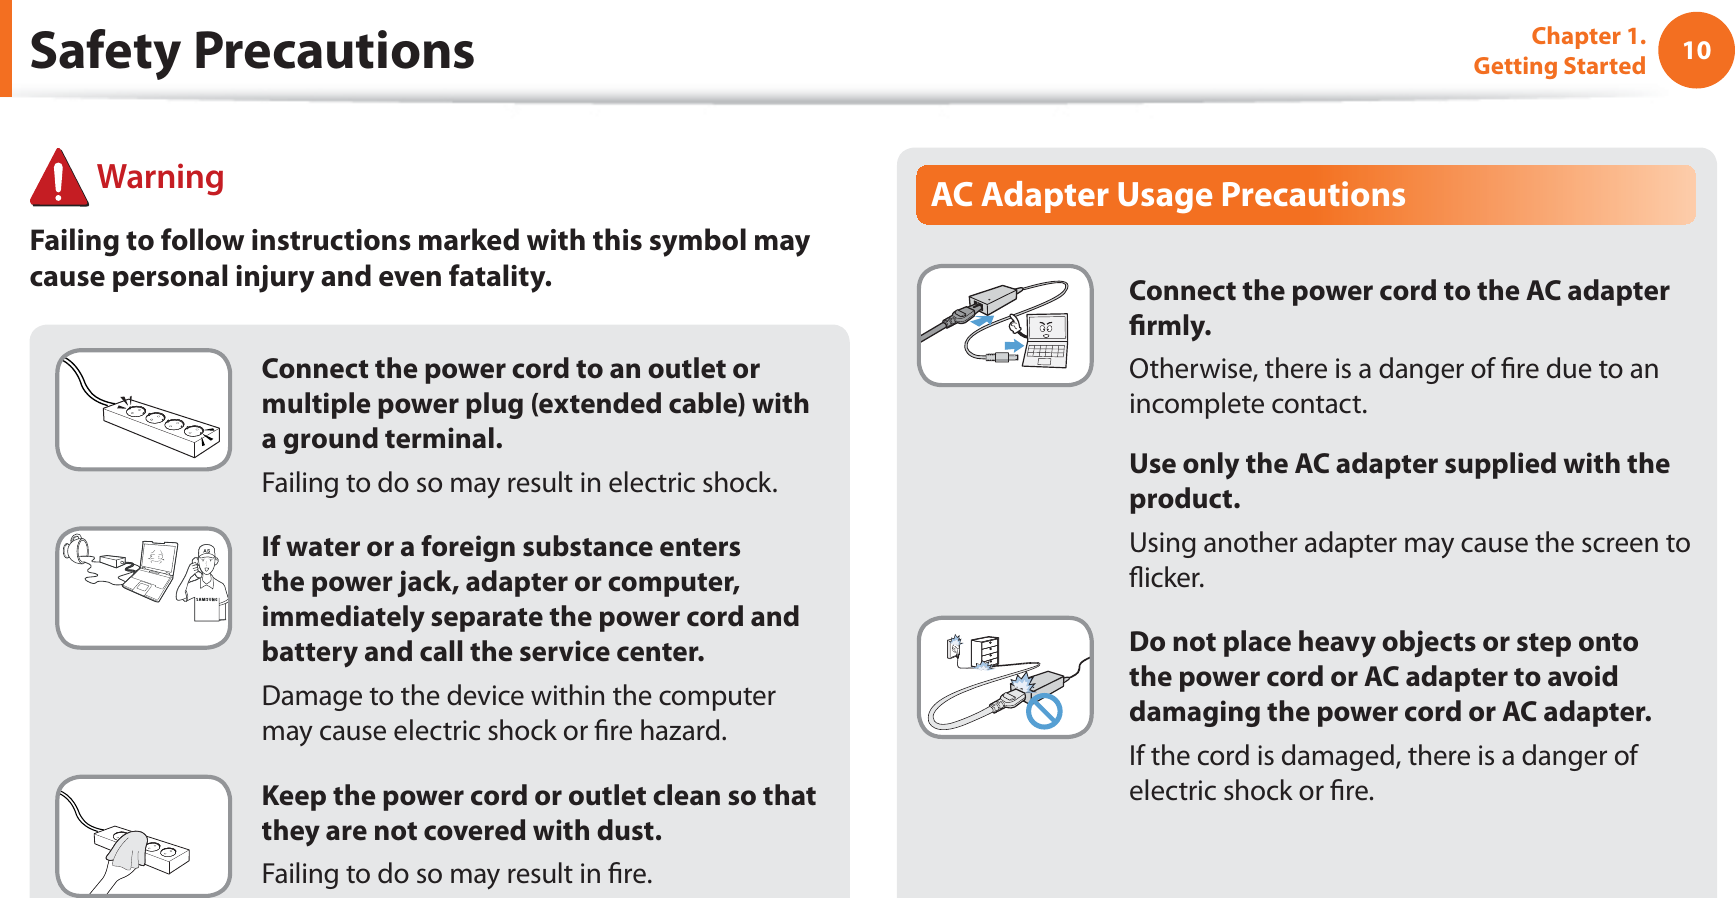 10Chapter 1. Getting StartedConnect the power cord to an outlet or multiple power plug (extended cable) with a ground terminal.Failing to do so may result in electric shock.If water or a foreign substance enters the power jack, adapter or computer, immediately separate the power cord and battery and call the service center.Damage to the device within the computer may cause electric shock or ﬁre hazard.Keep the power cord or outlet clean so that they are not covered with dust.Failing to do so may result in ﬁre.AC Adapter Usage PrecautionsConnect the power cord to the AC adapter ﬁrmly.Otherwise, there is a danger of ﬁre due to an incomplete contact.Use only the AC adapter supplied with the product.Using another adapter may cause the screen to ﬂicker.Do not place heavy objects or step onto the power cord or AC adapter to avoid damaging the power cord or AC adapter.If the cord is damaged, there is a danger of electric shock or ﬁre. WarningFailing to follow instructions marked with this symbol may cause personal injury and even fatality.Safety Precautions